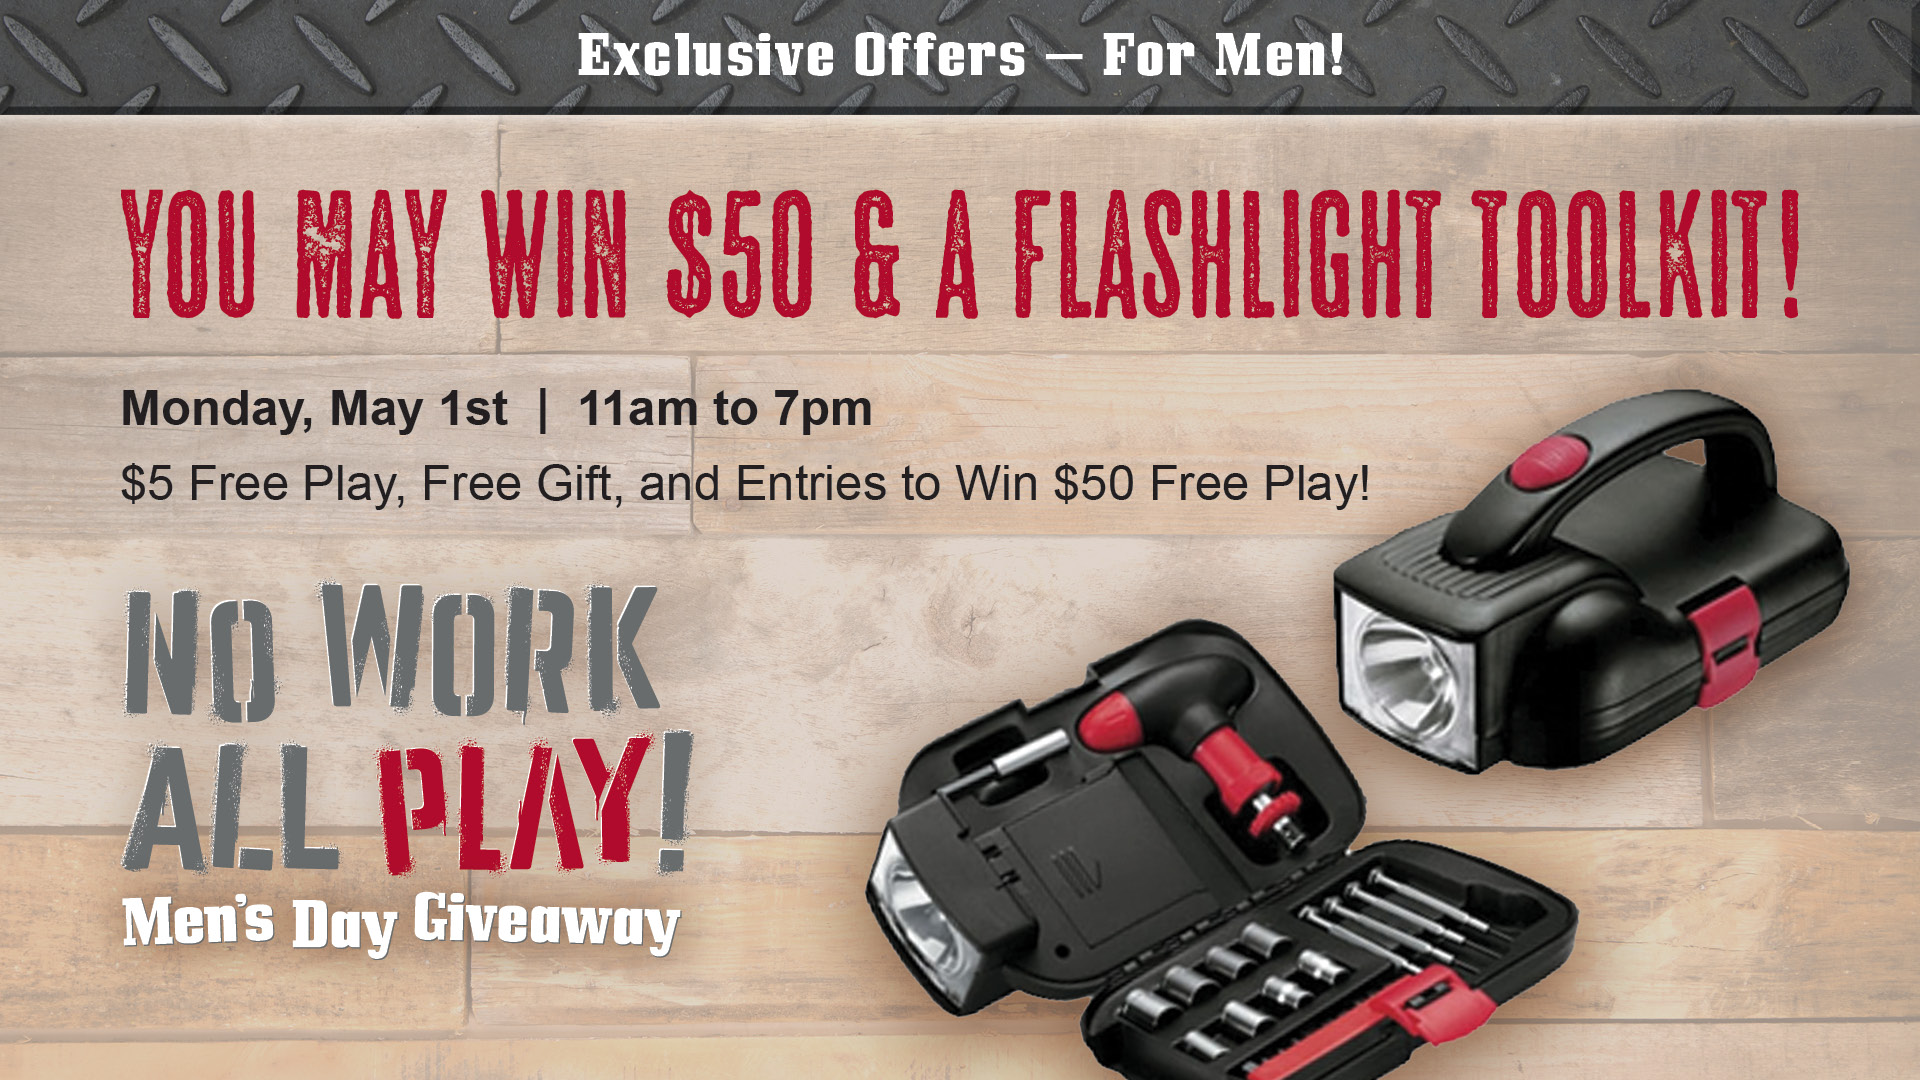 No Work All Play! Men's Day Giveaway. Exclusive offers - for men! You may win $50 & a flashlight toolkit! Monday, May 1st, 11am to 7pm. $5 free play, free gift, and entries to win $50 free play!